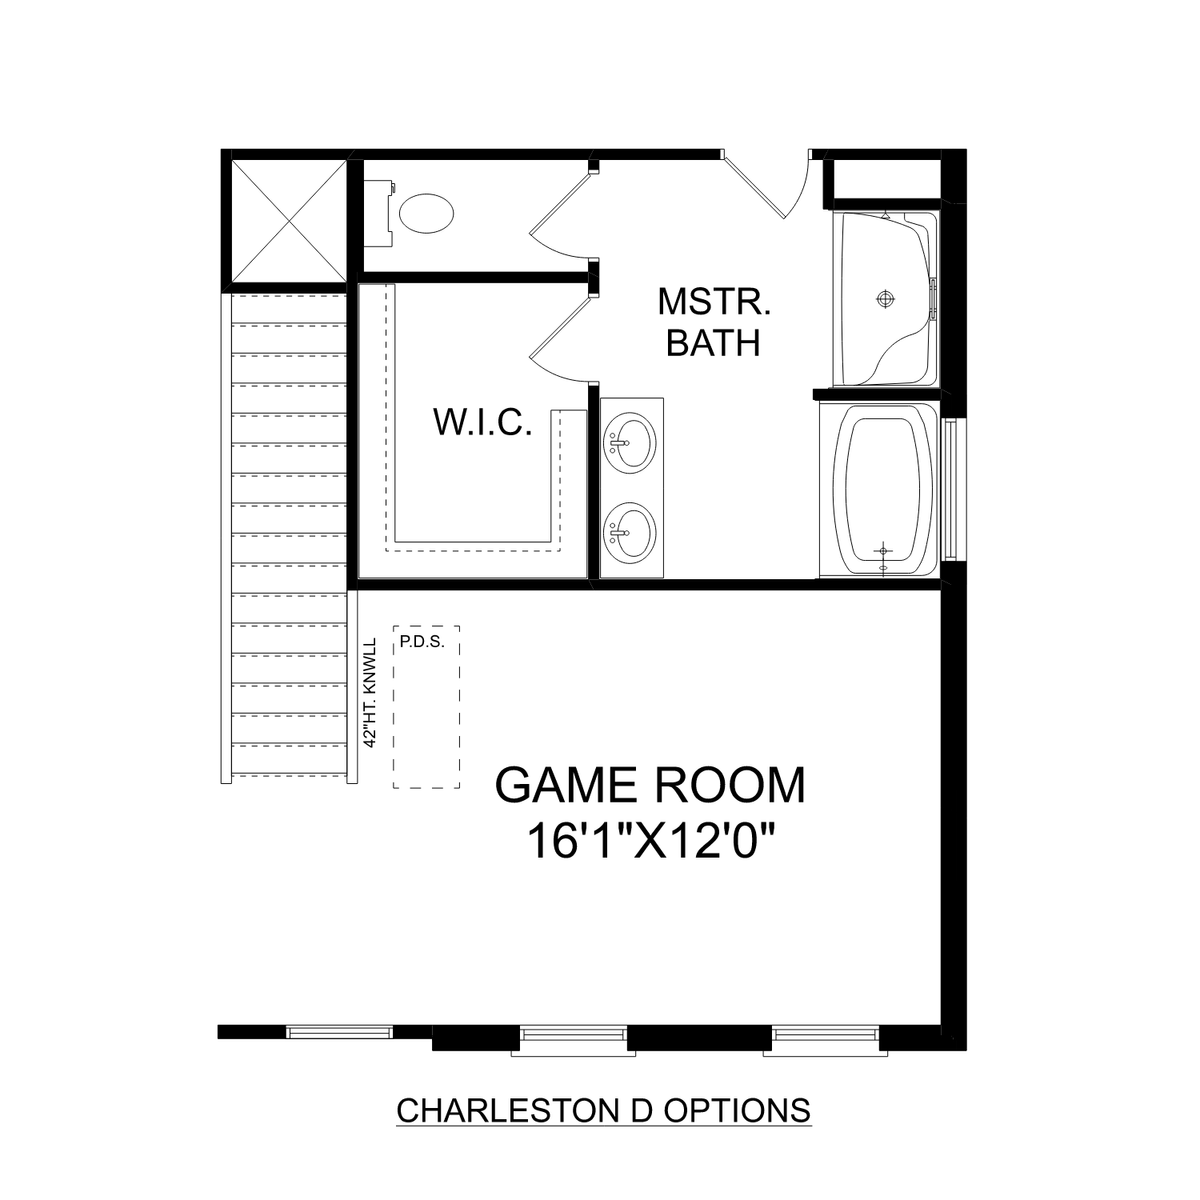 3 - The Charleston D buildable floor plan layout in Davidson Homes' Creek Grove community.